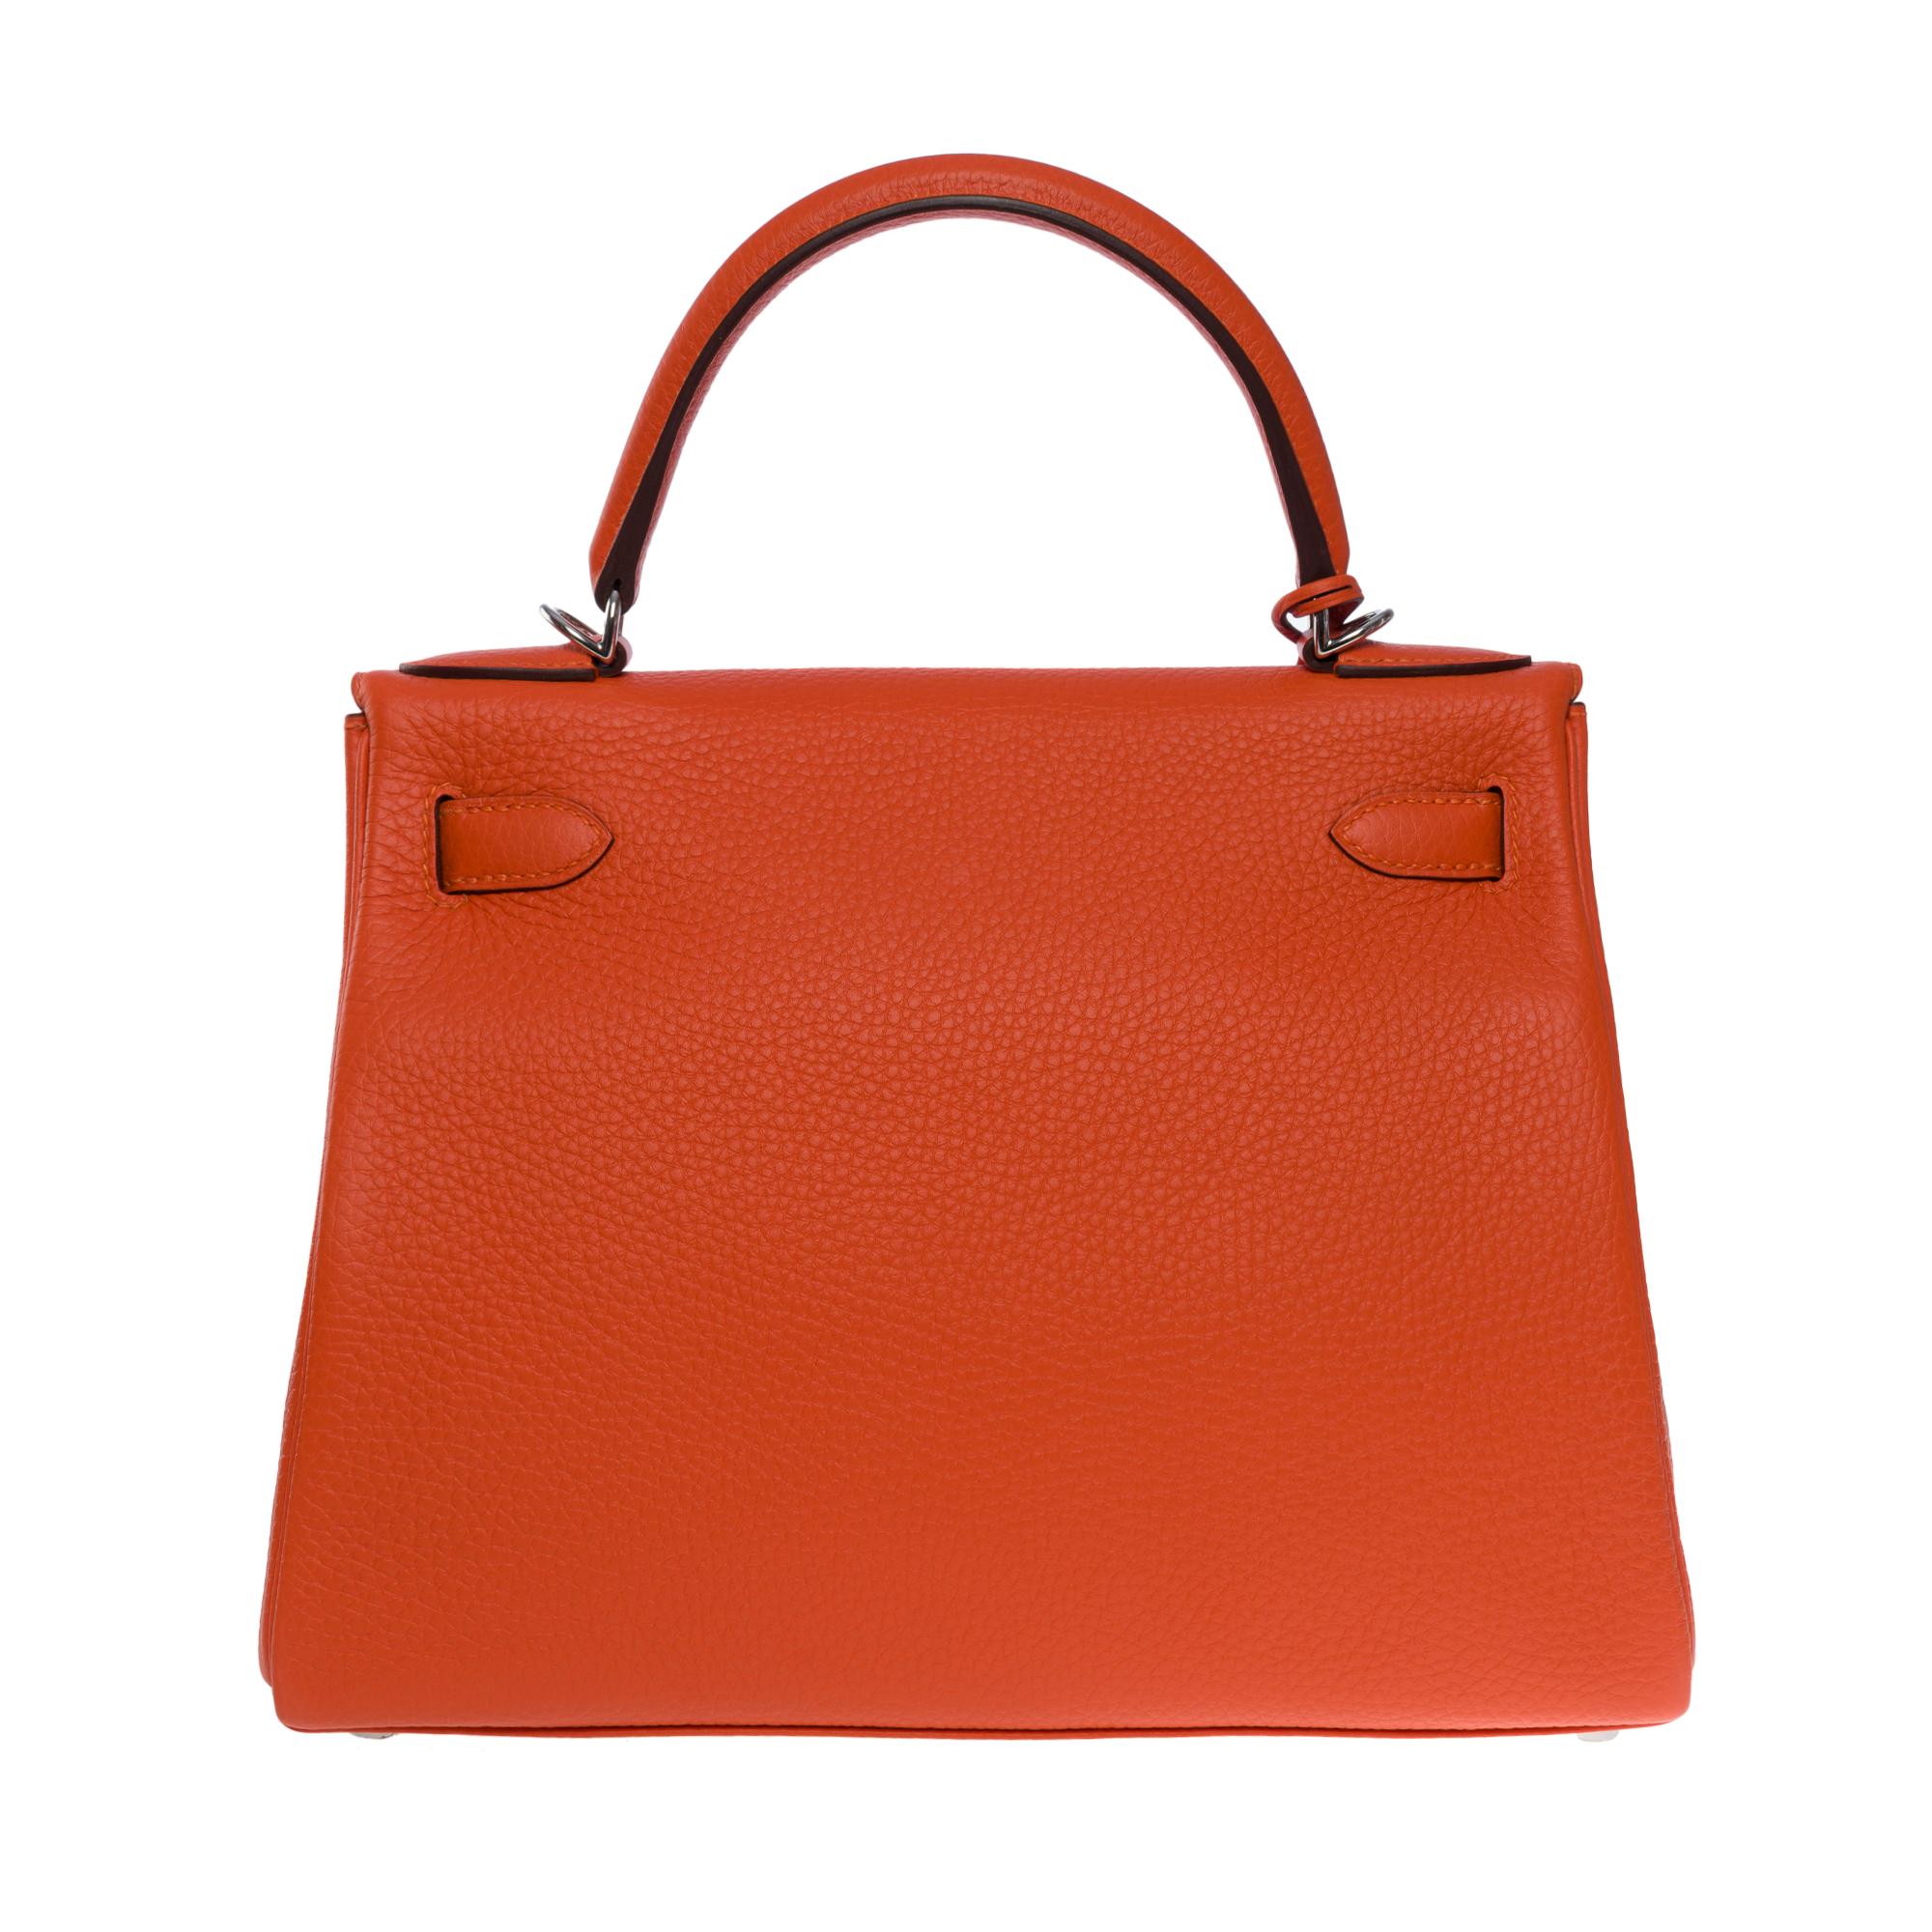 New Amazing Hermes Kelly 28 retourne handbag strap in Orange Feu leather, SHW In New Condition For Sale In Paris, IDF